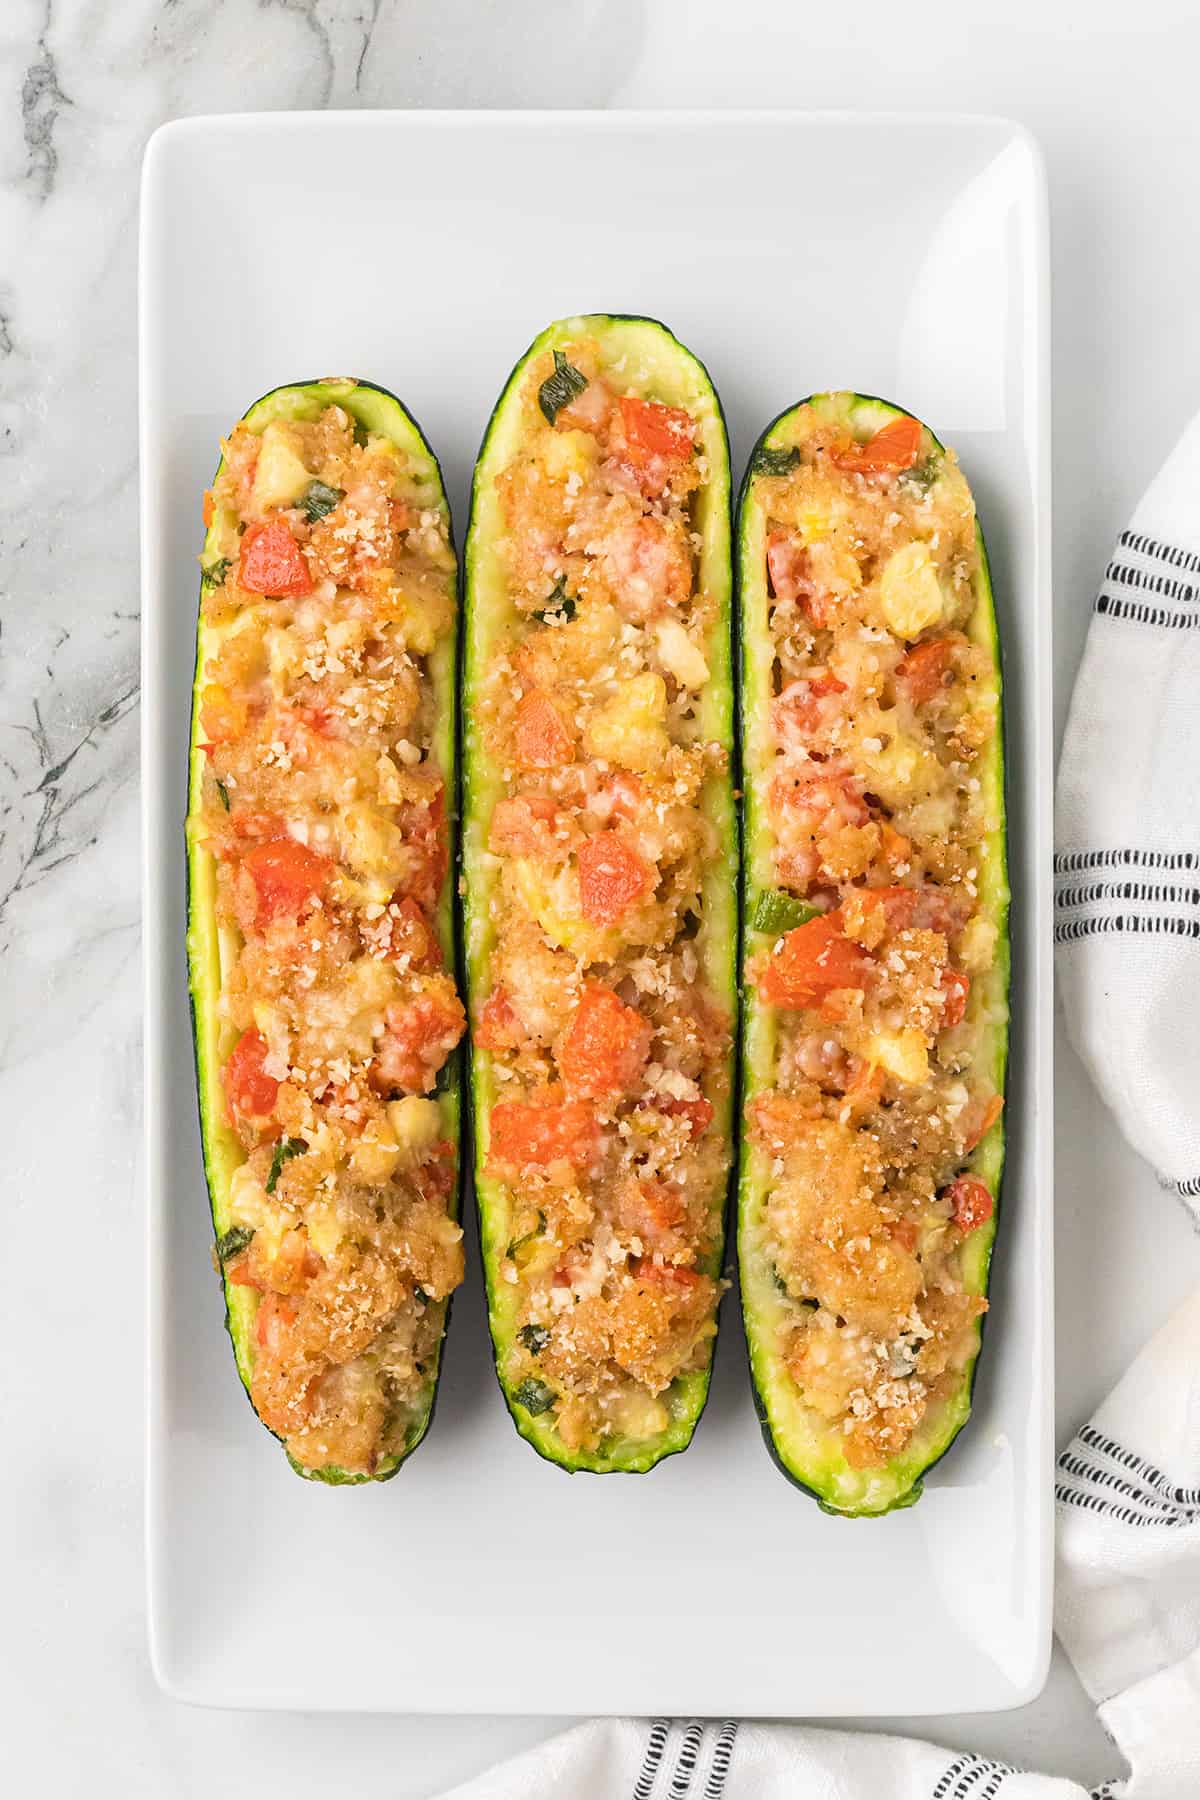 Three baked zucchini on a white plate.